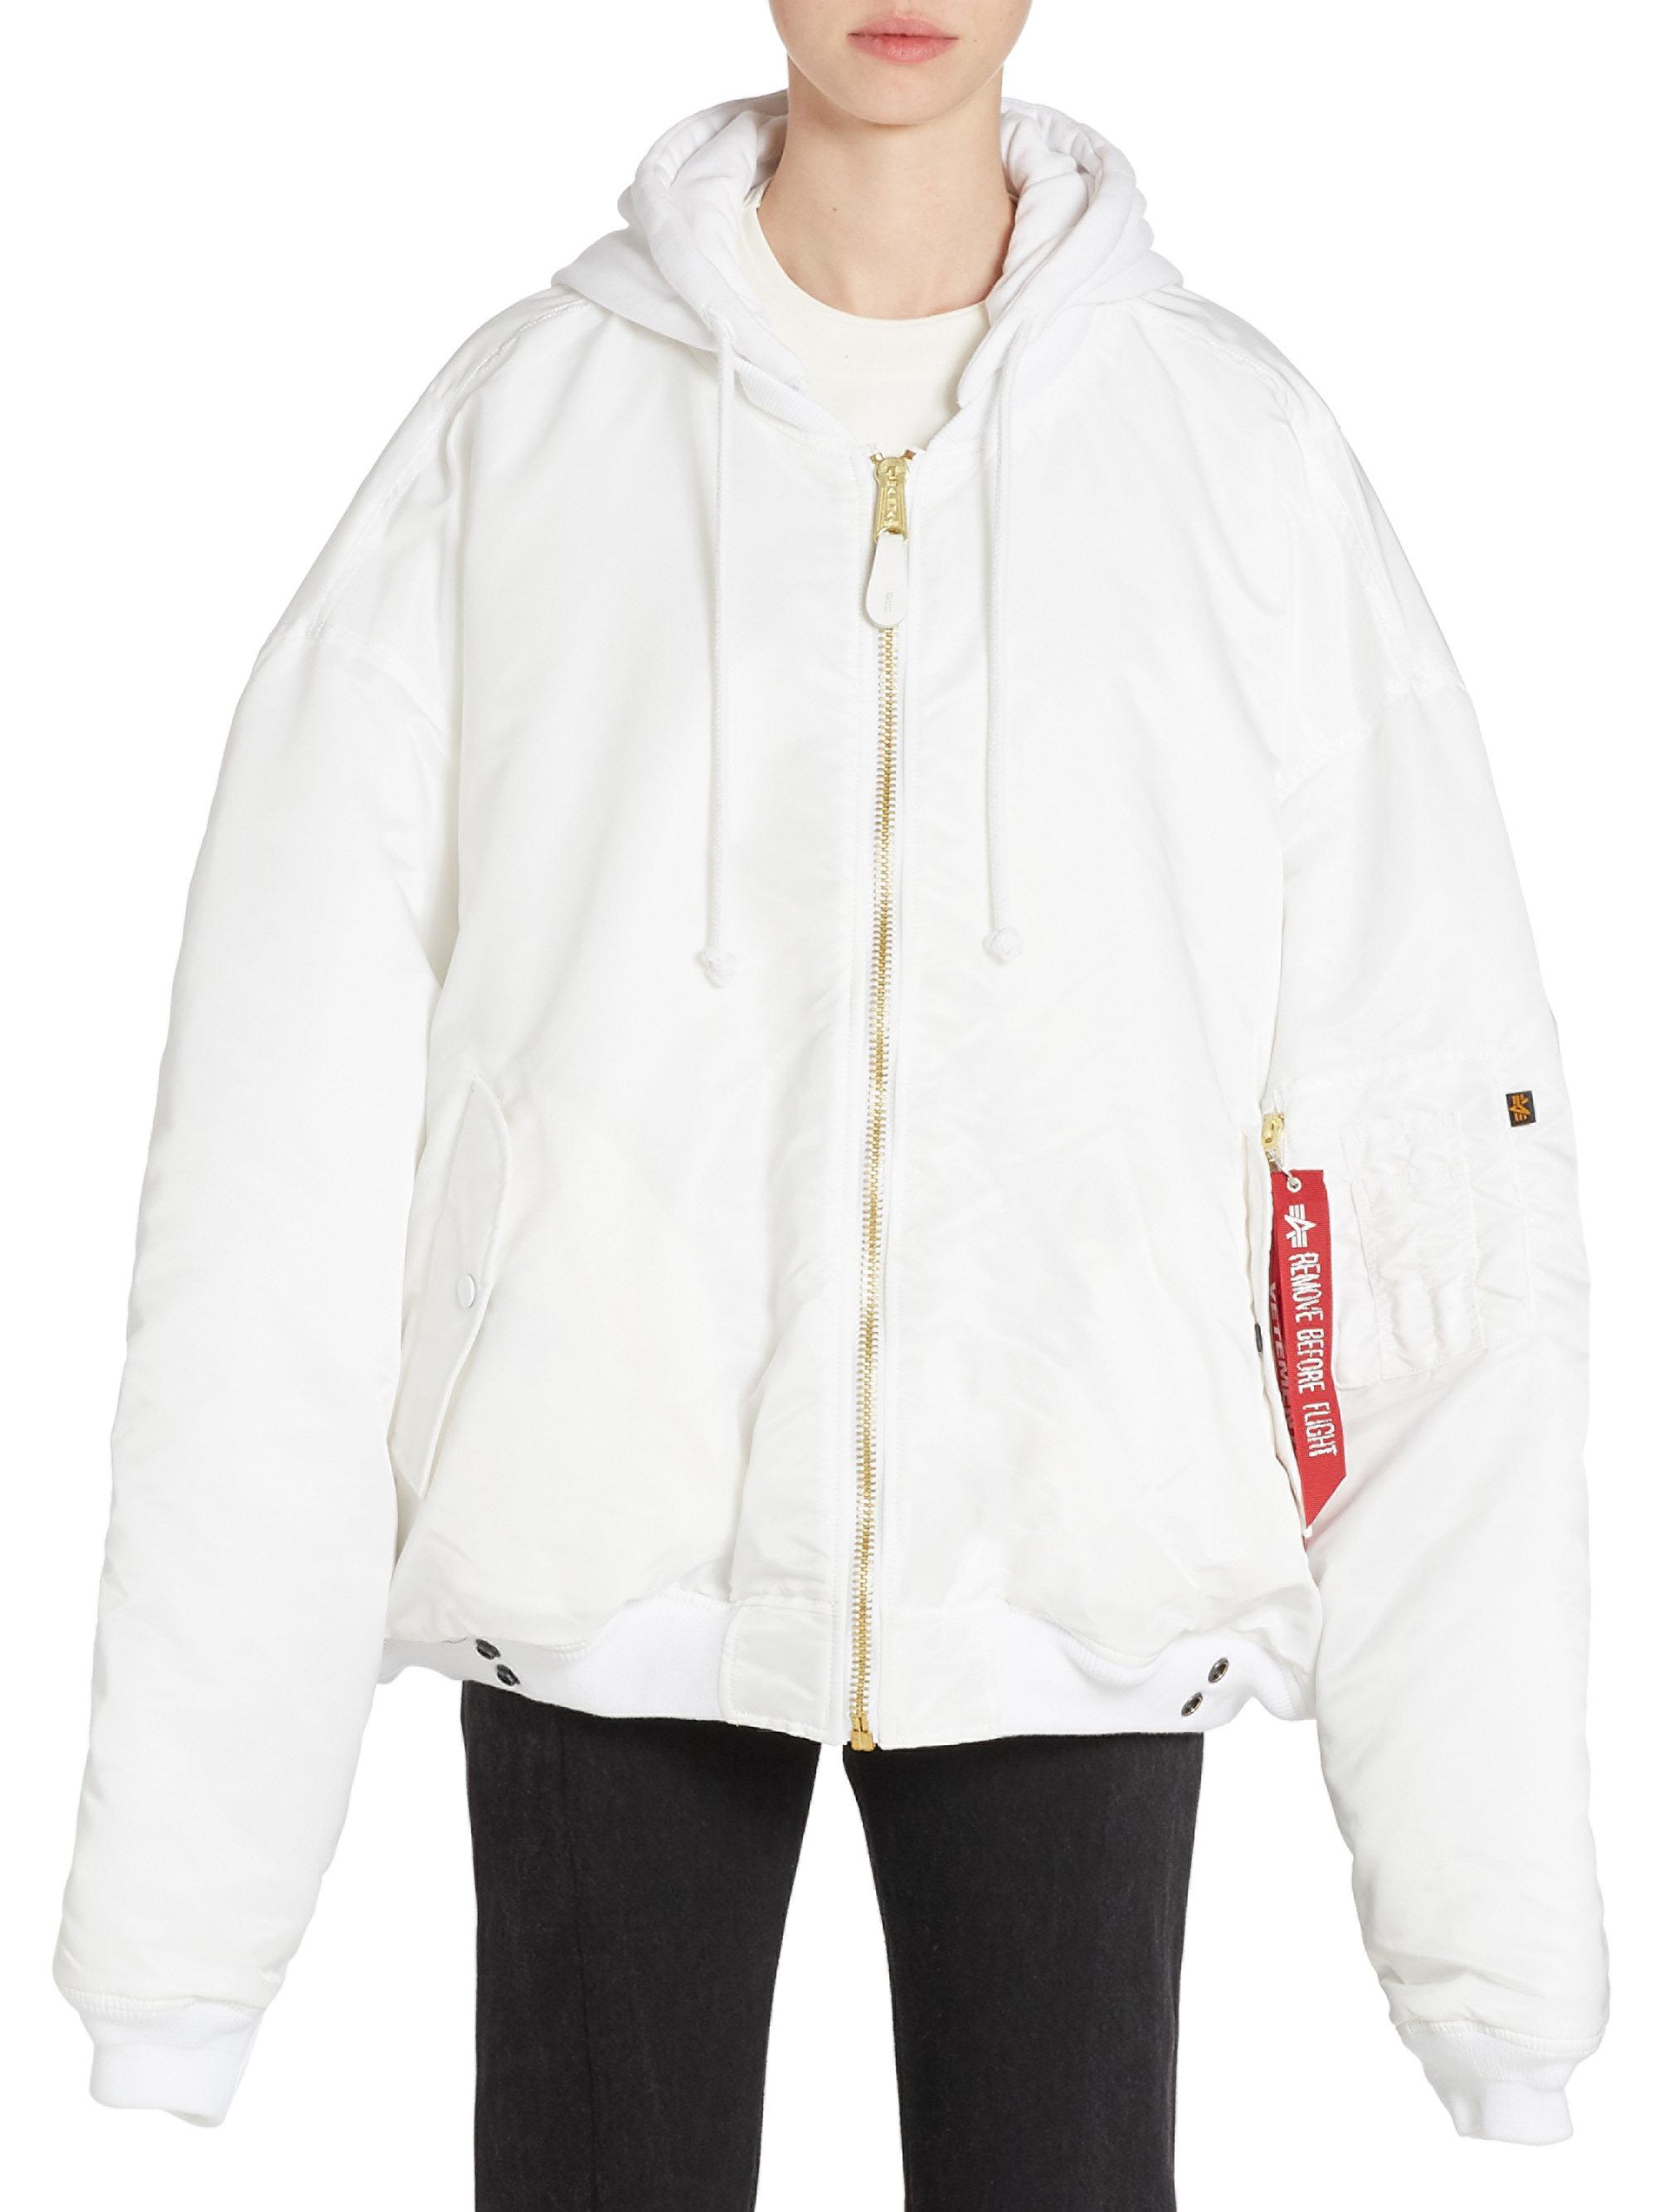 Vetements X Alpha Industries Reversible Bomber Jacket in White | Lyst